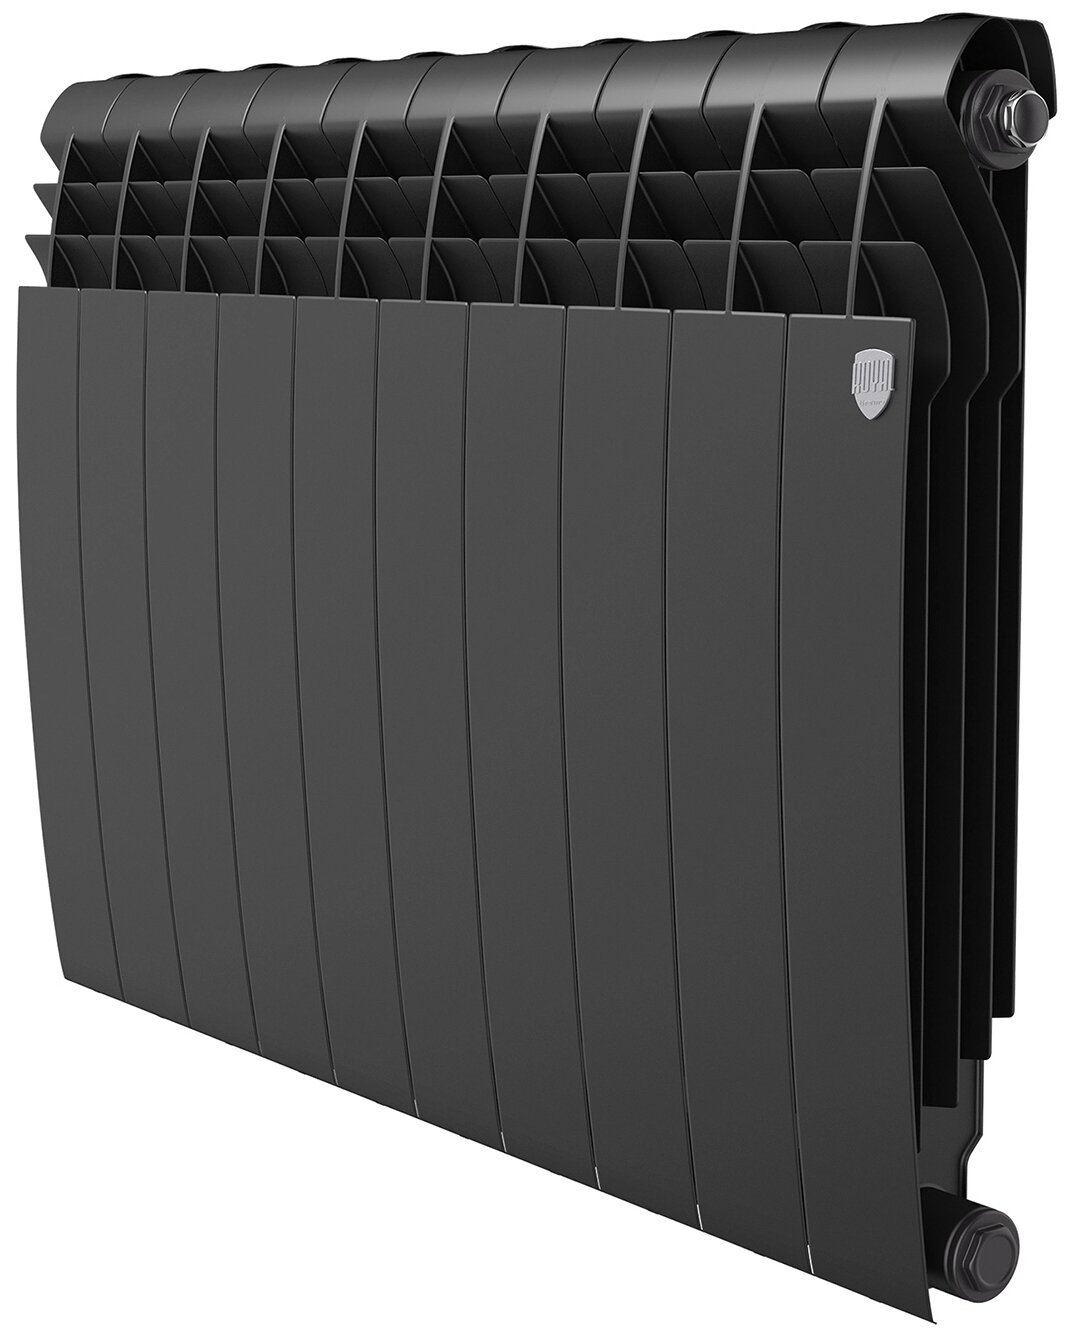  Royal Thermo BiLiner 500 Noir Sable, 10 .